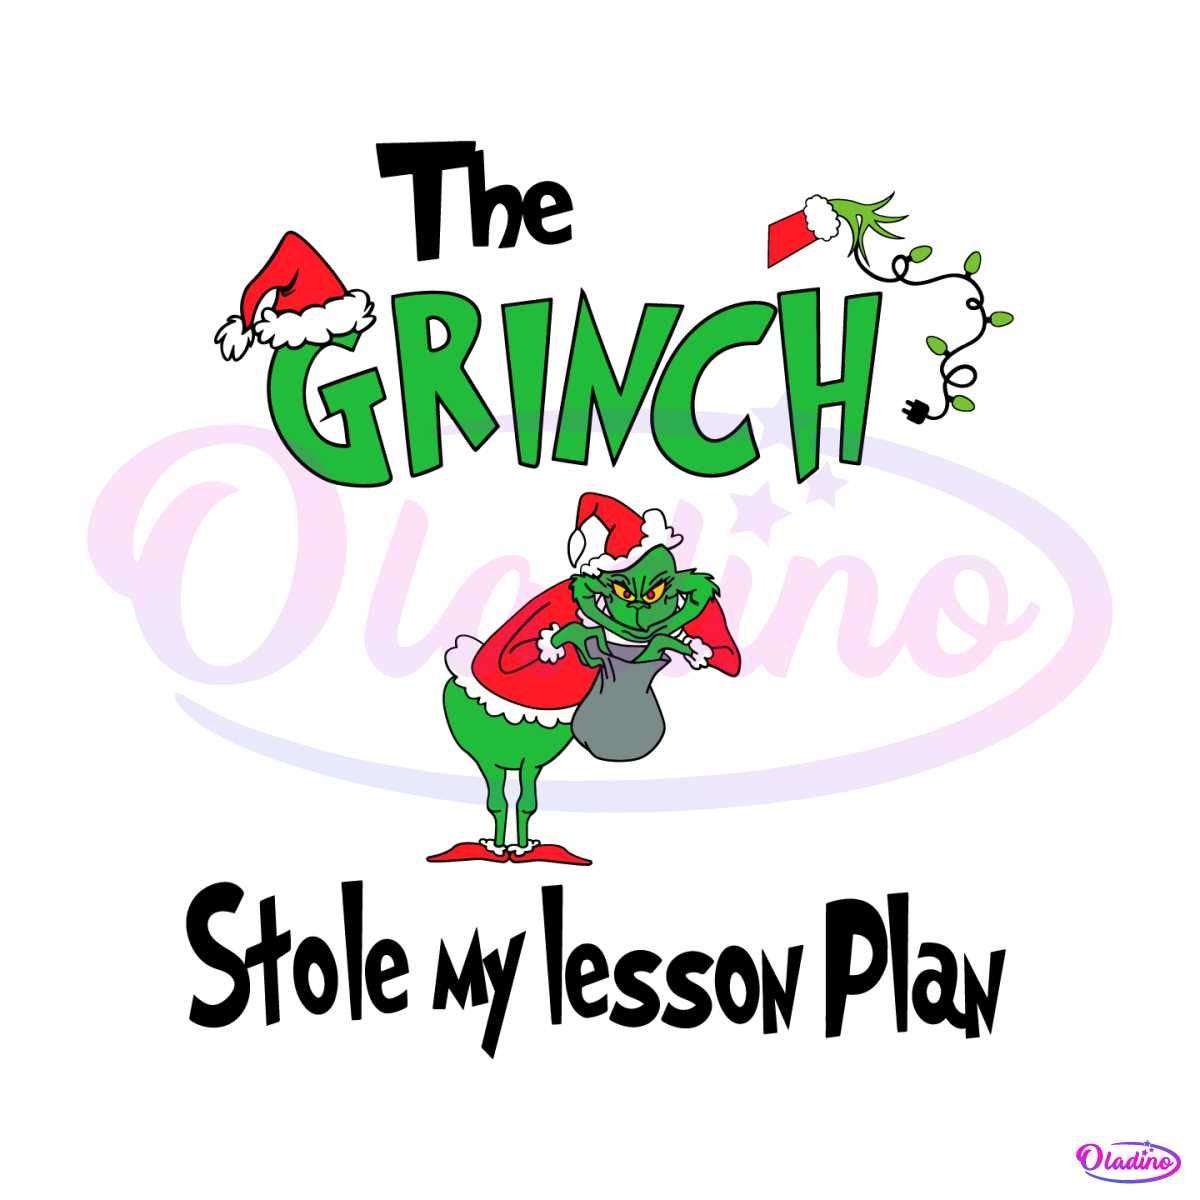 Free The Grinch Stole My Lesson Plan SVG